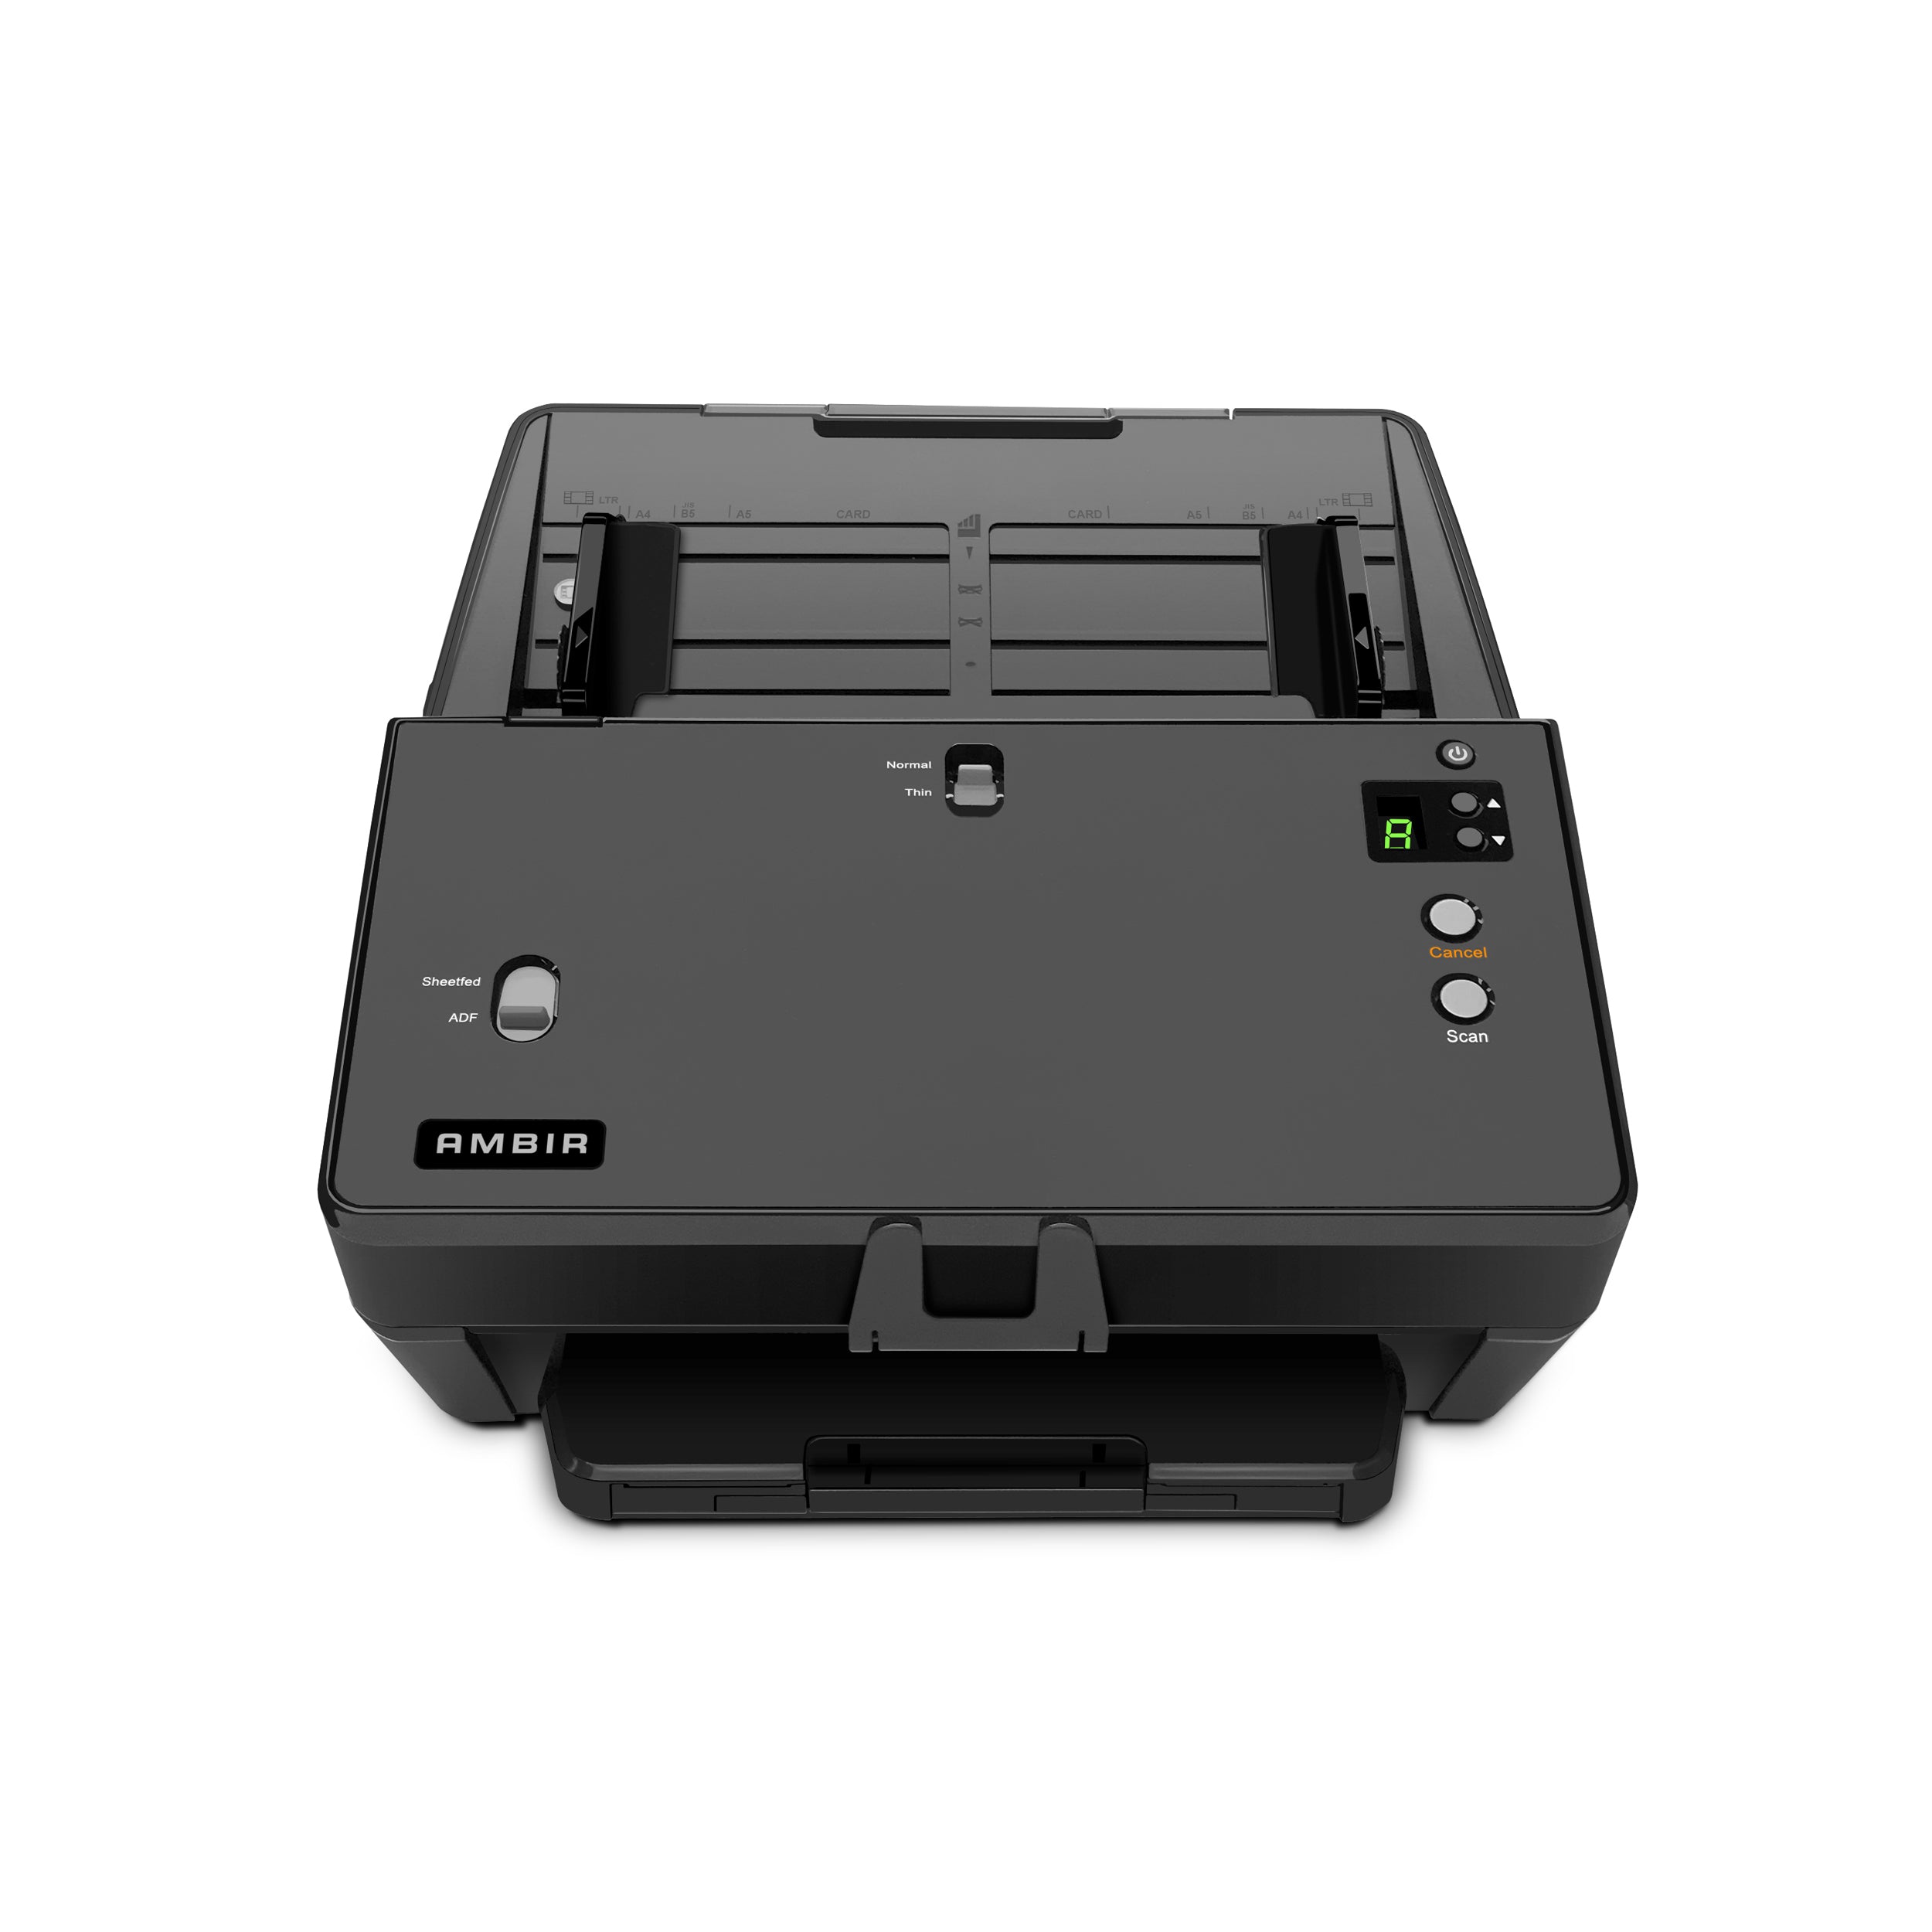 nScan 1060 60ppm High Speed Document Document, Card and Passport Scanner (DS1060-AS)